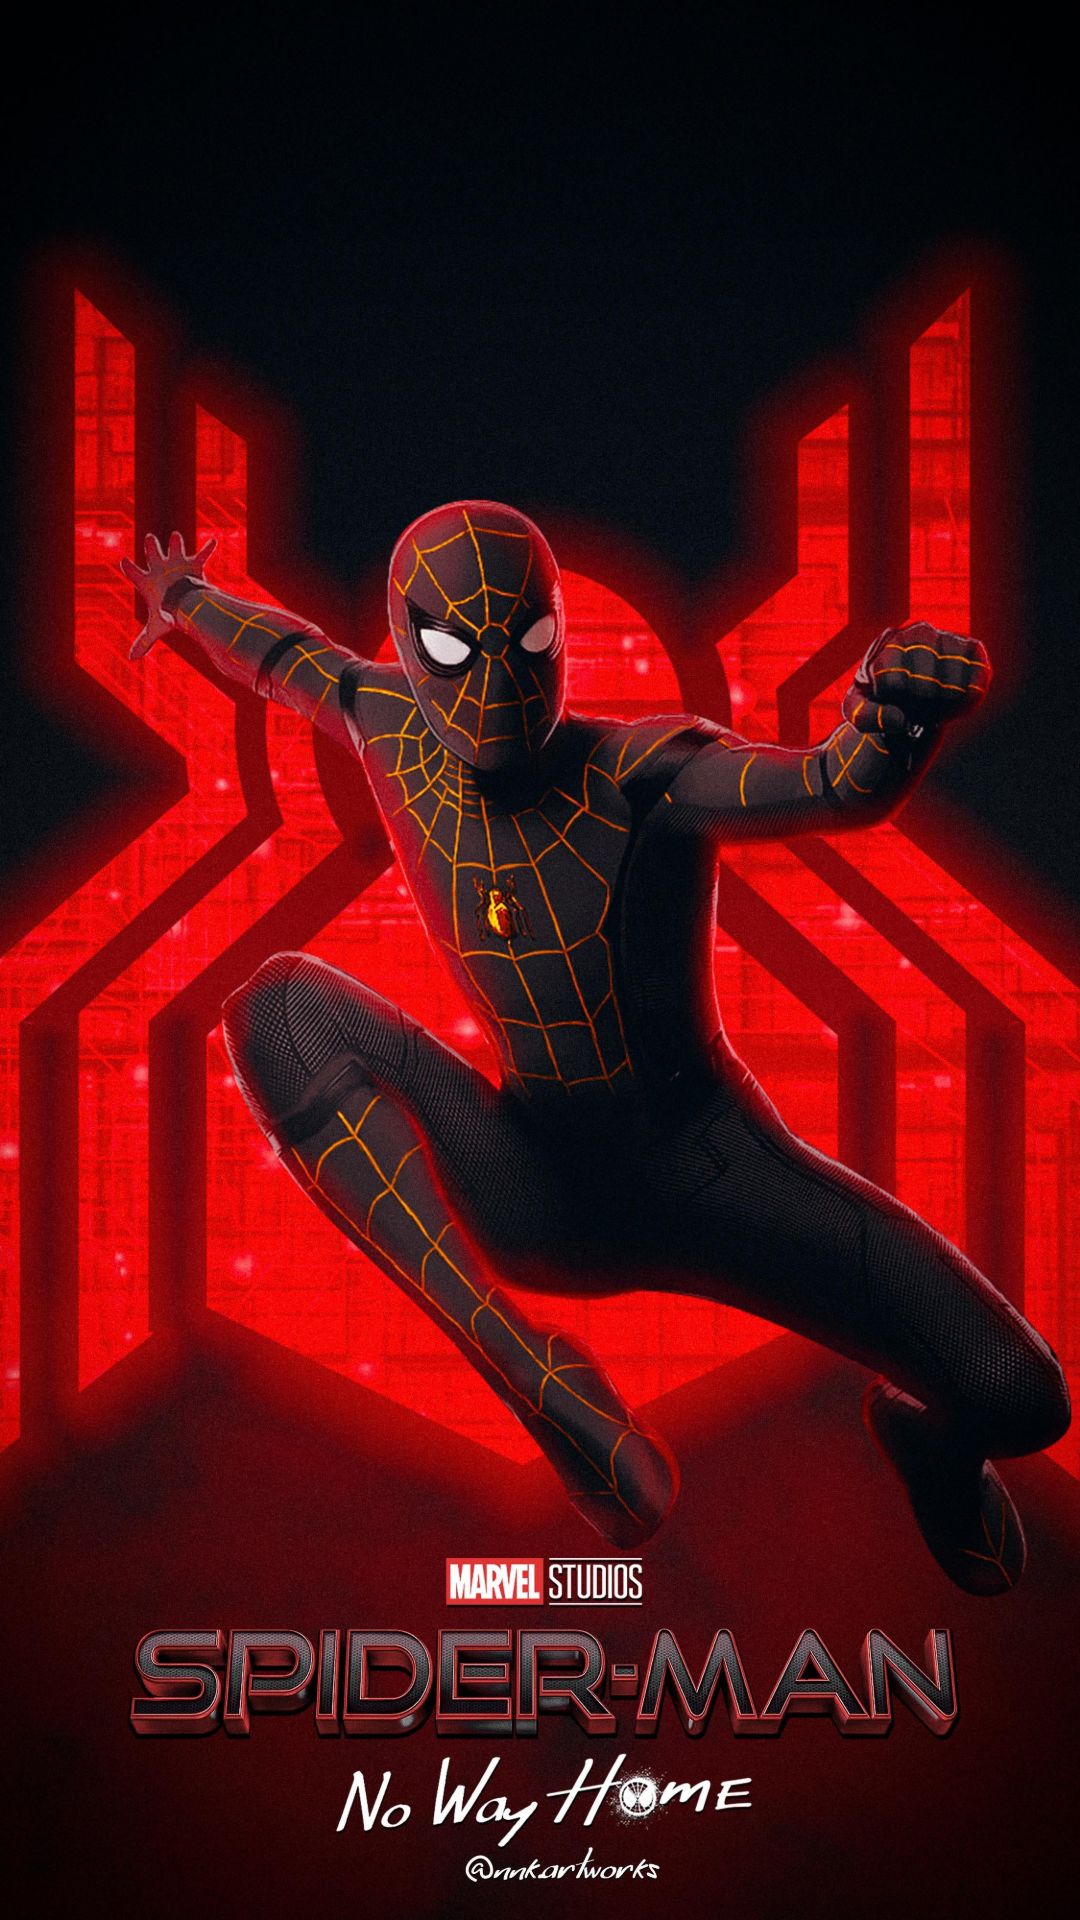  Spiderman no way home wallpaper 4k for mobile